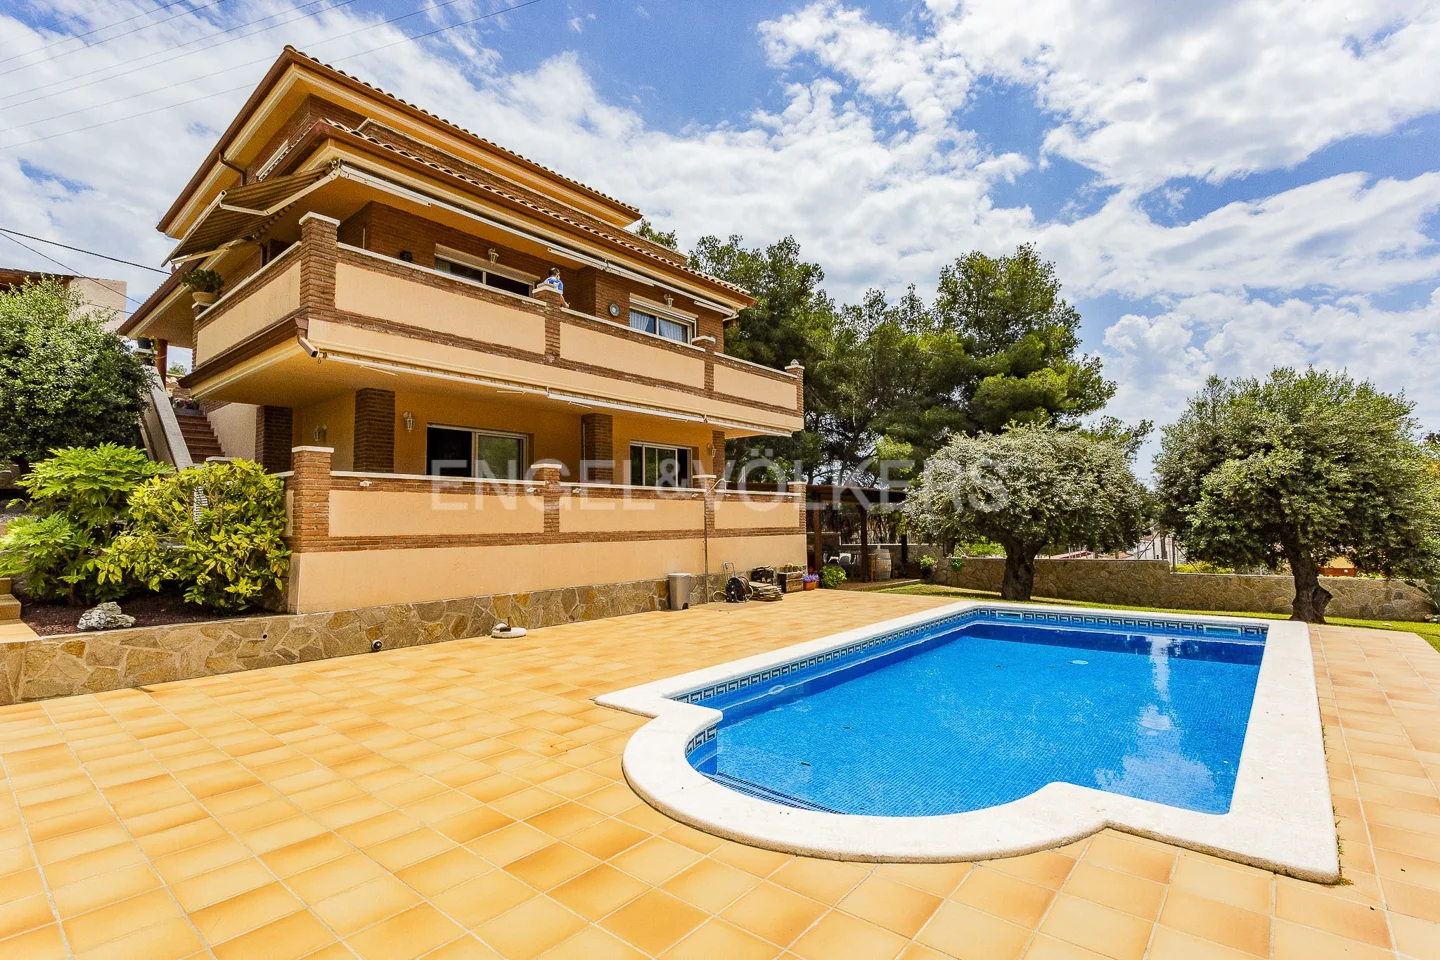 Excellent family house in Cubelles